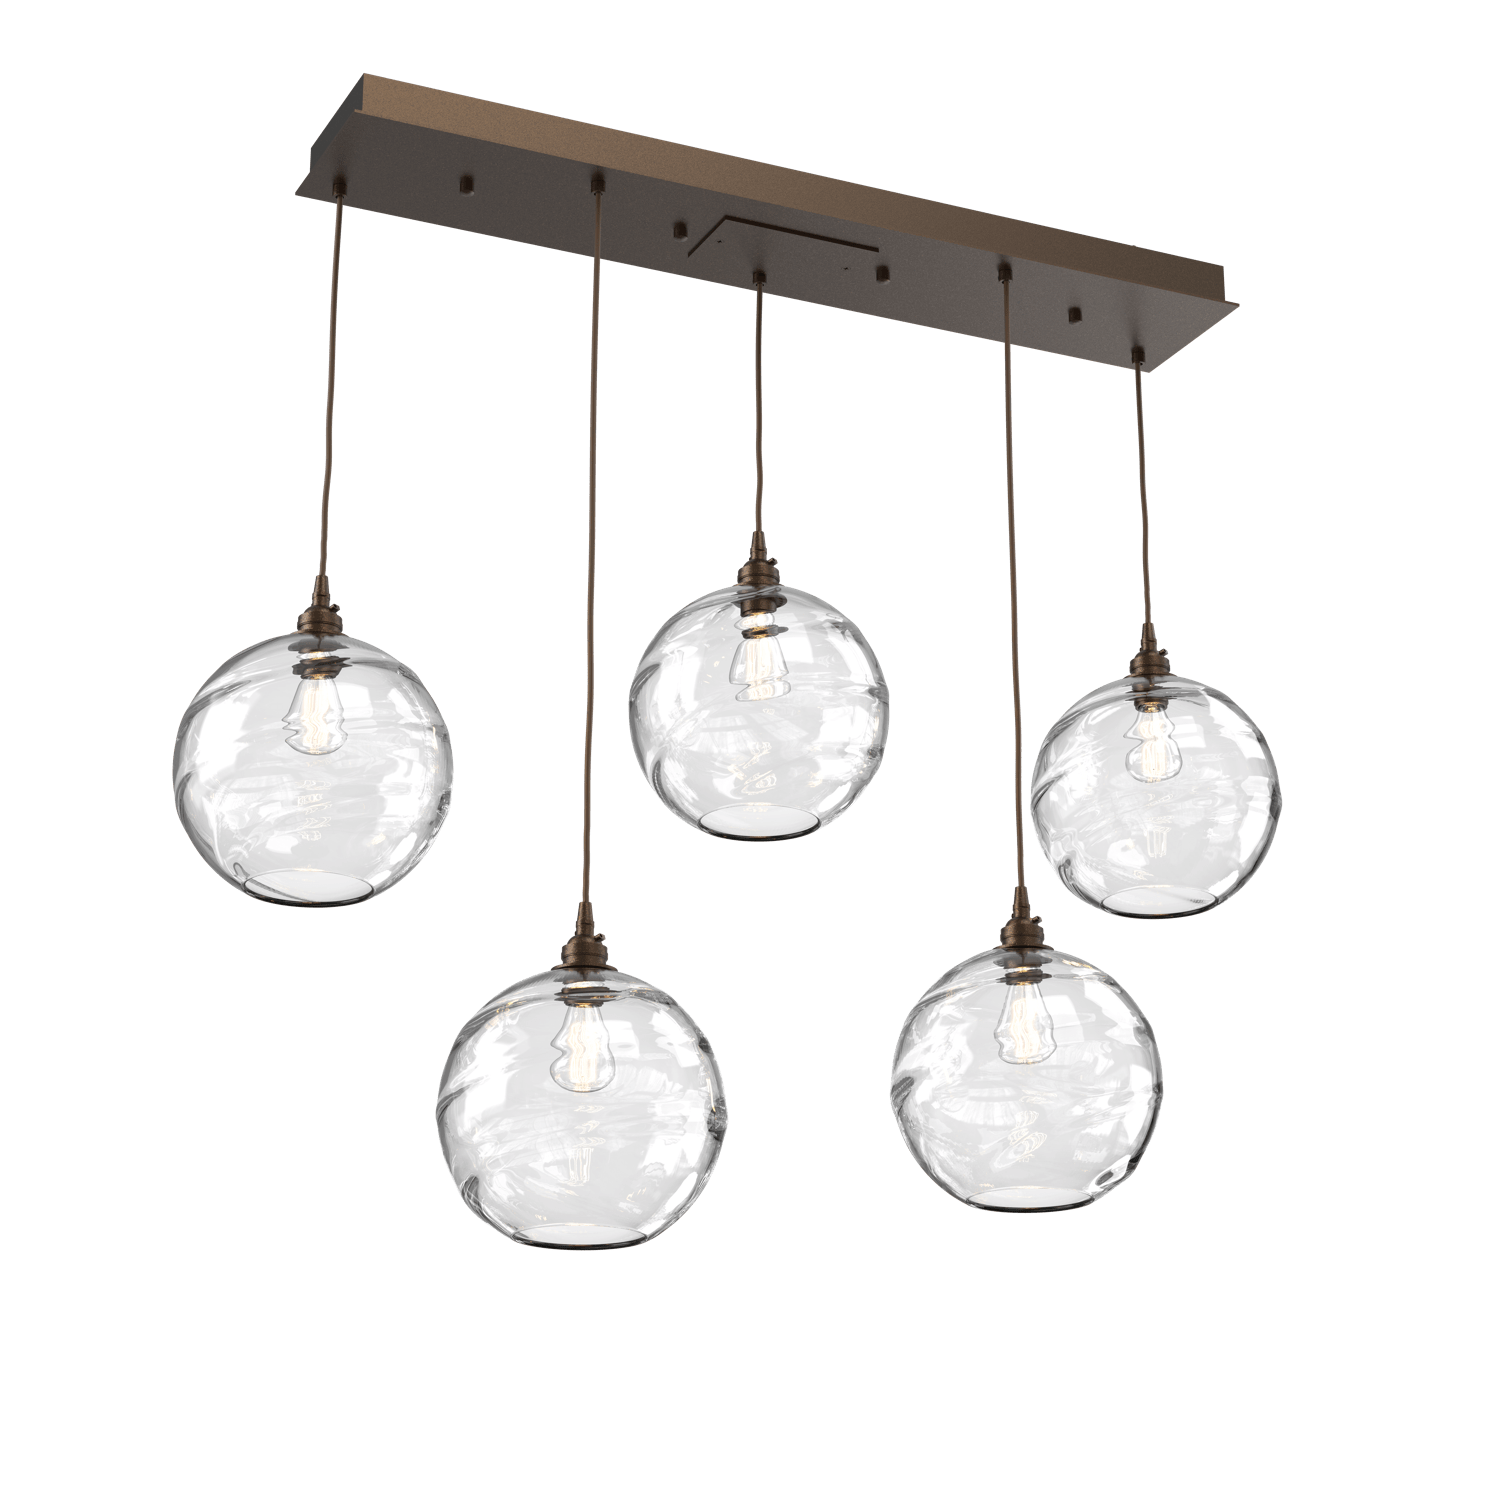 PLB0047-05-FB-OC-Hammerton-Studio-Optic-Blown-Glass-Terra-5-light-linear-pendant-chandelier-with-flat-bronze-finish-and-optic-clear-blown-glass-shades-and-incandescent-lamping